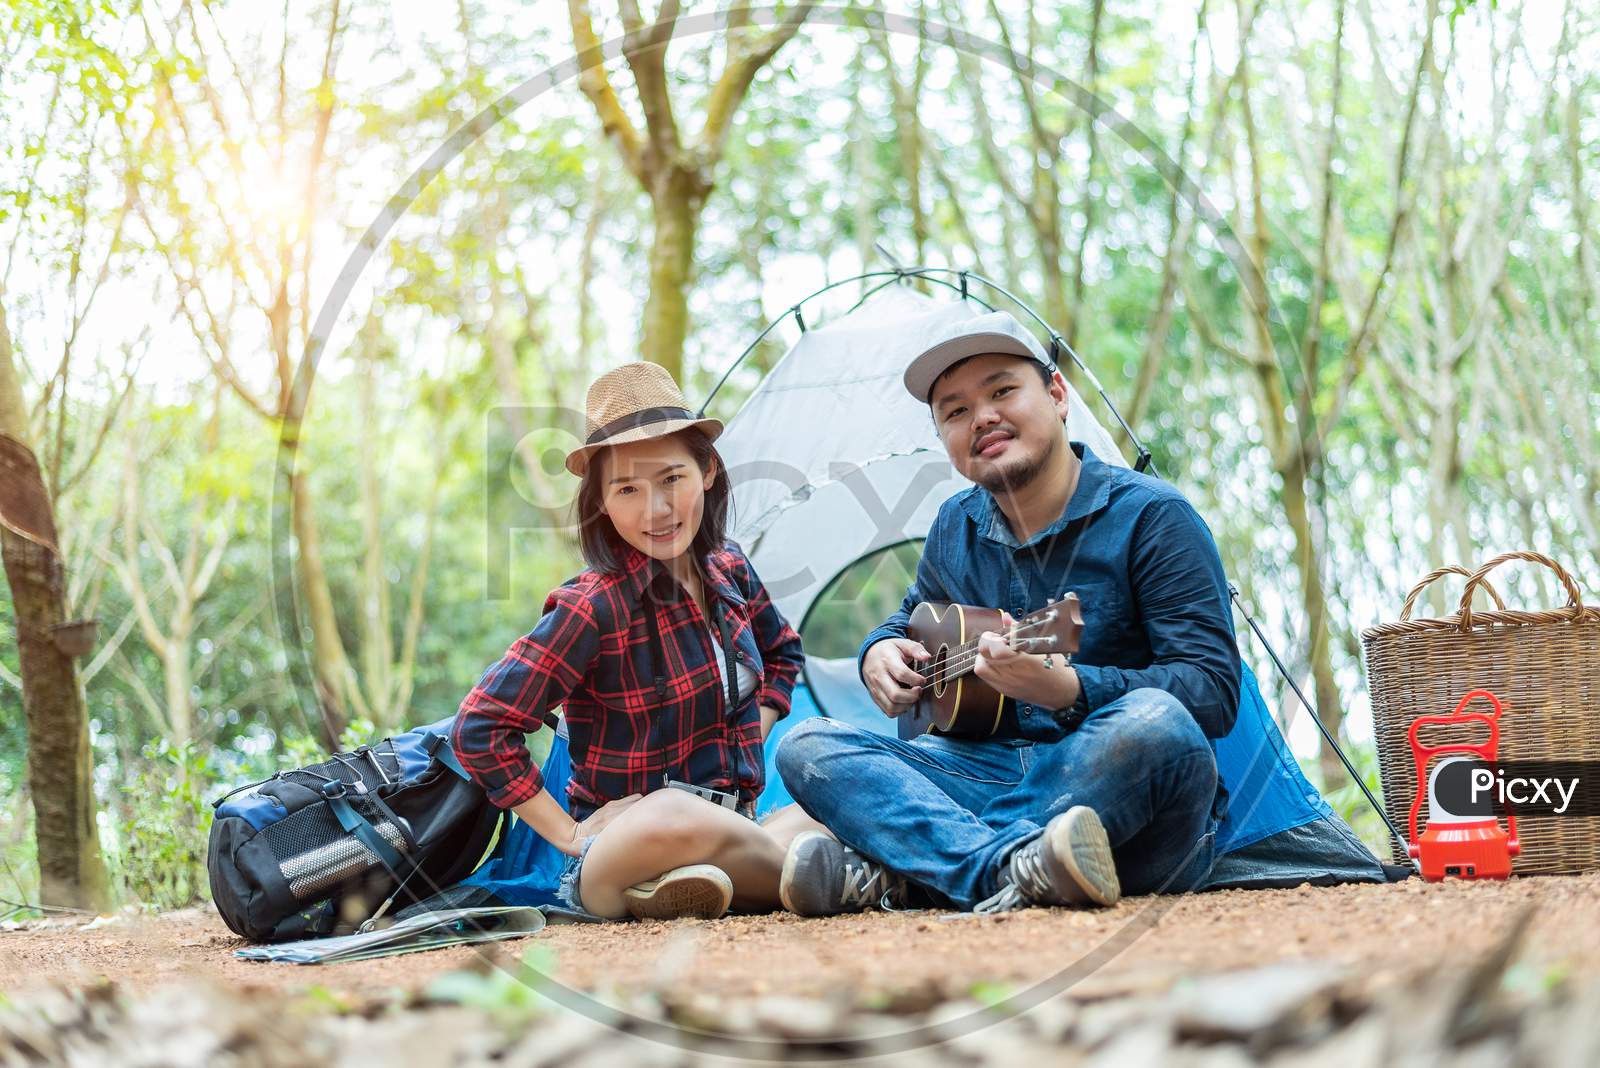 Asian Couple Camping In The Forest. Man Playing Ukulele With Woman In Front Of Camping Tent. Lamp And Basket And Backpack Element. People And Outdoor Lifestyles Concept. Adventure And Travel Theme.